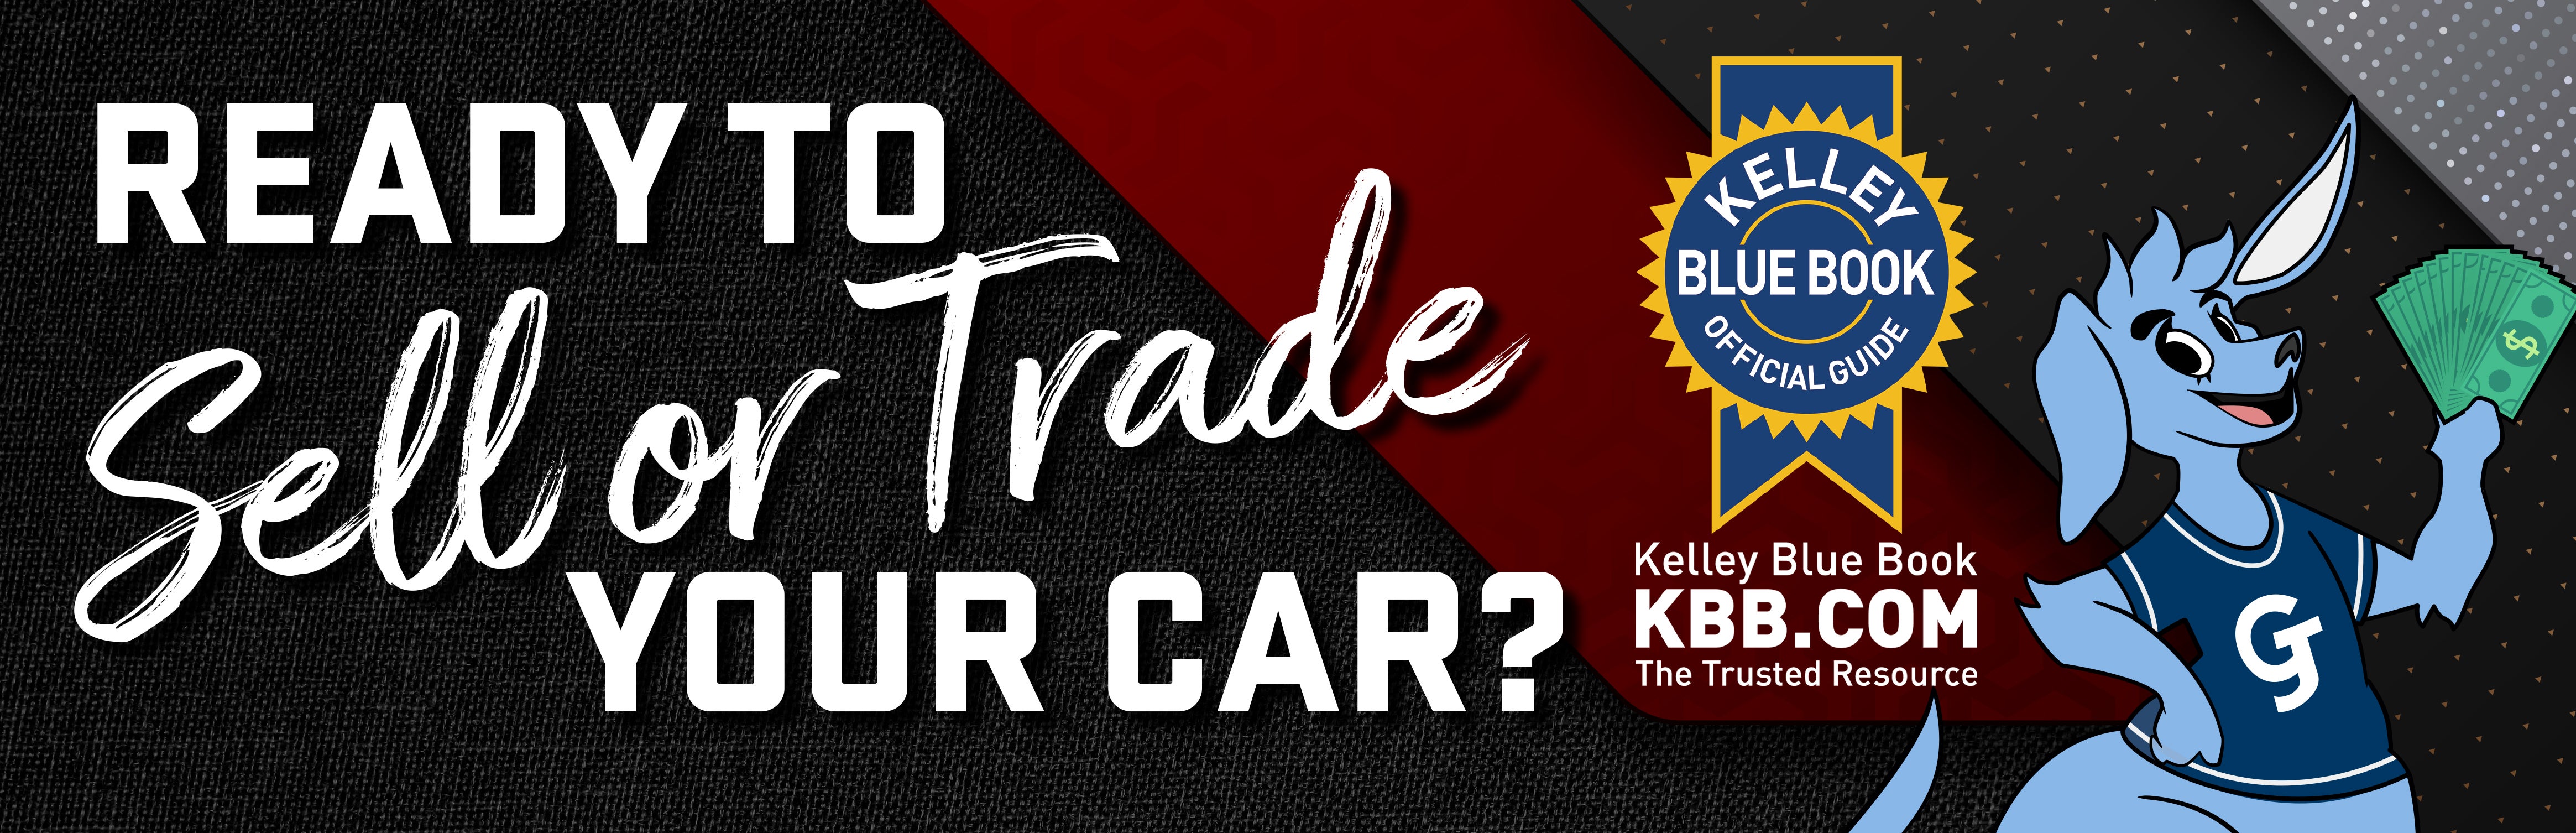 kbb sell or trade your vehicle banner 